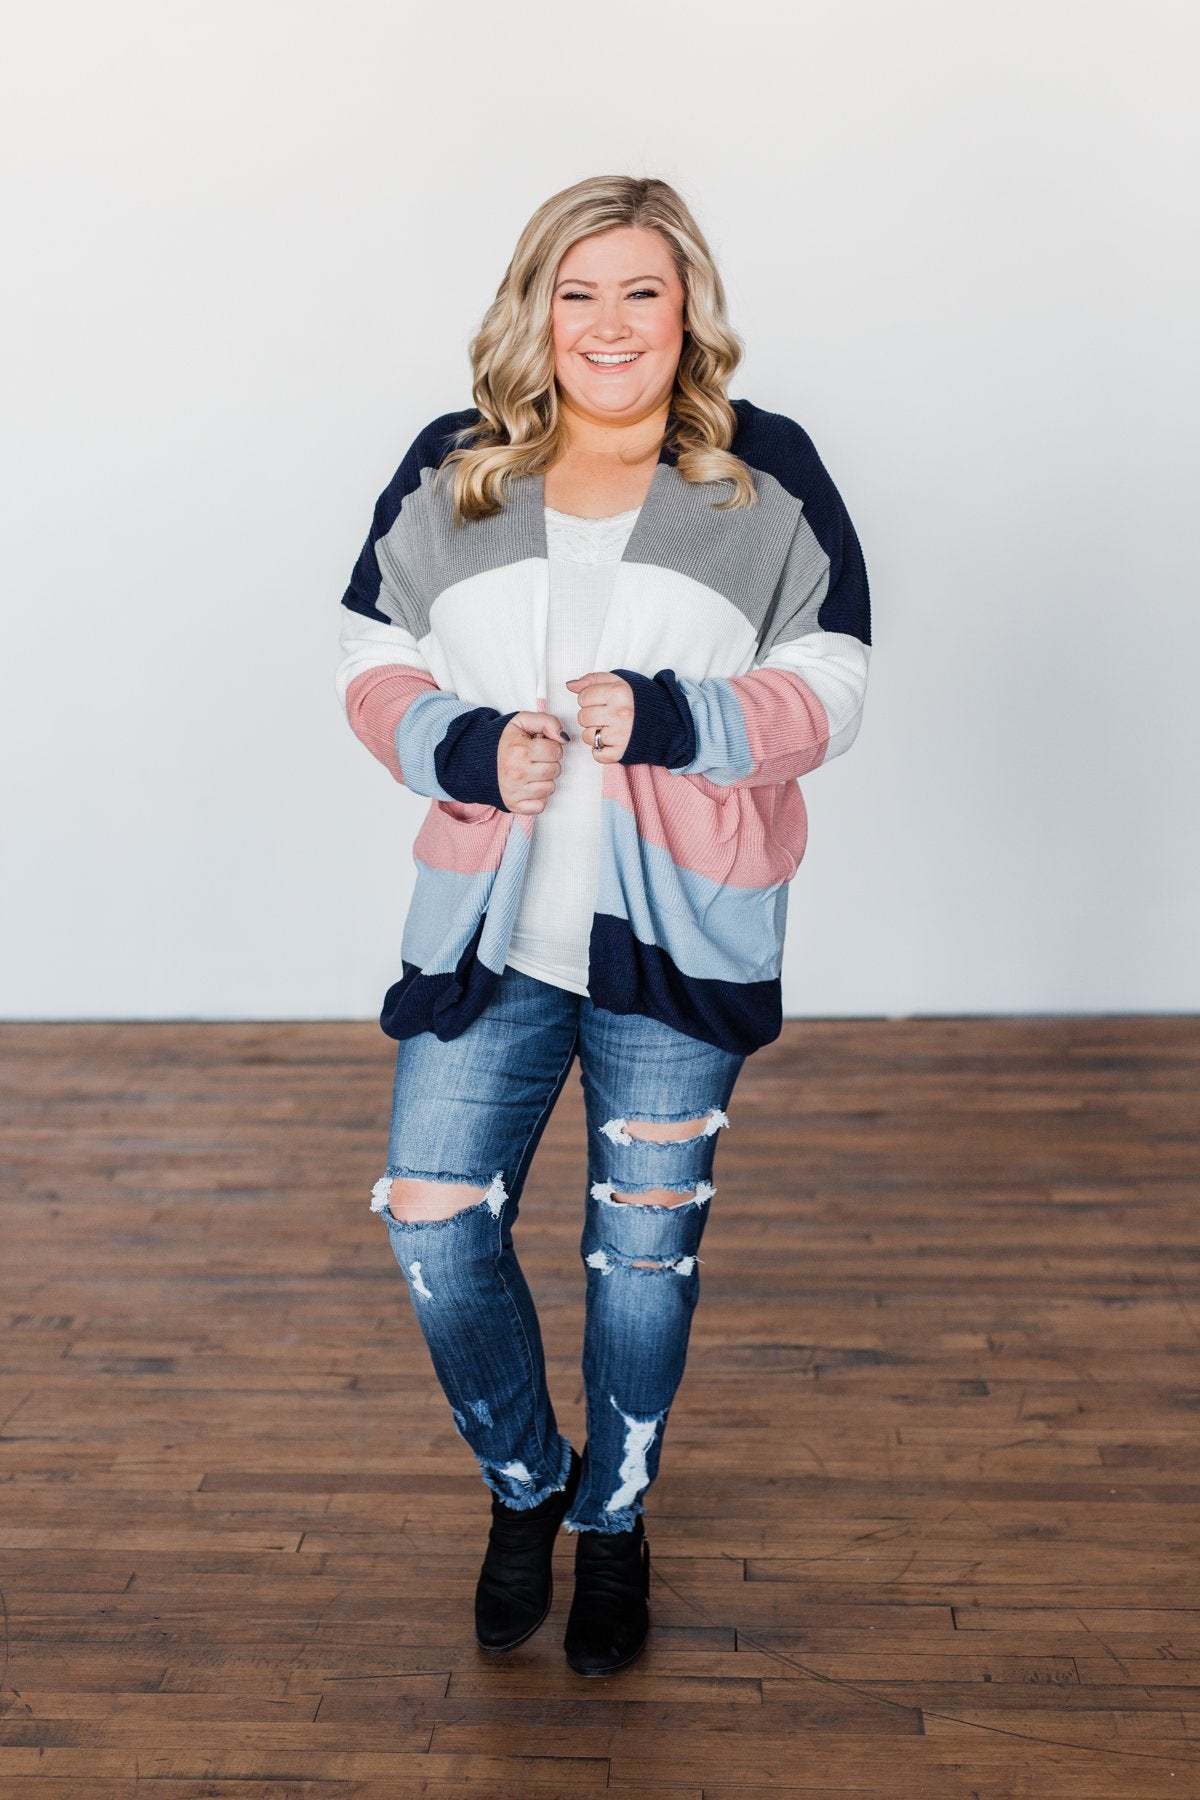 All Day Delight Knitted Cardigan- Grey, Pink, & Blue Tones